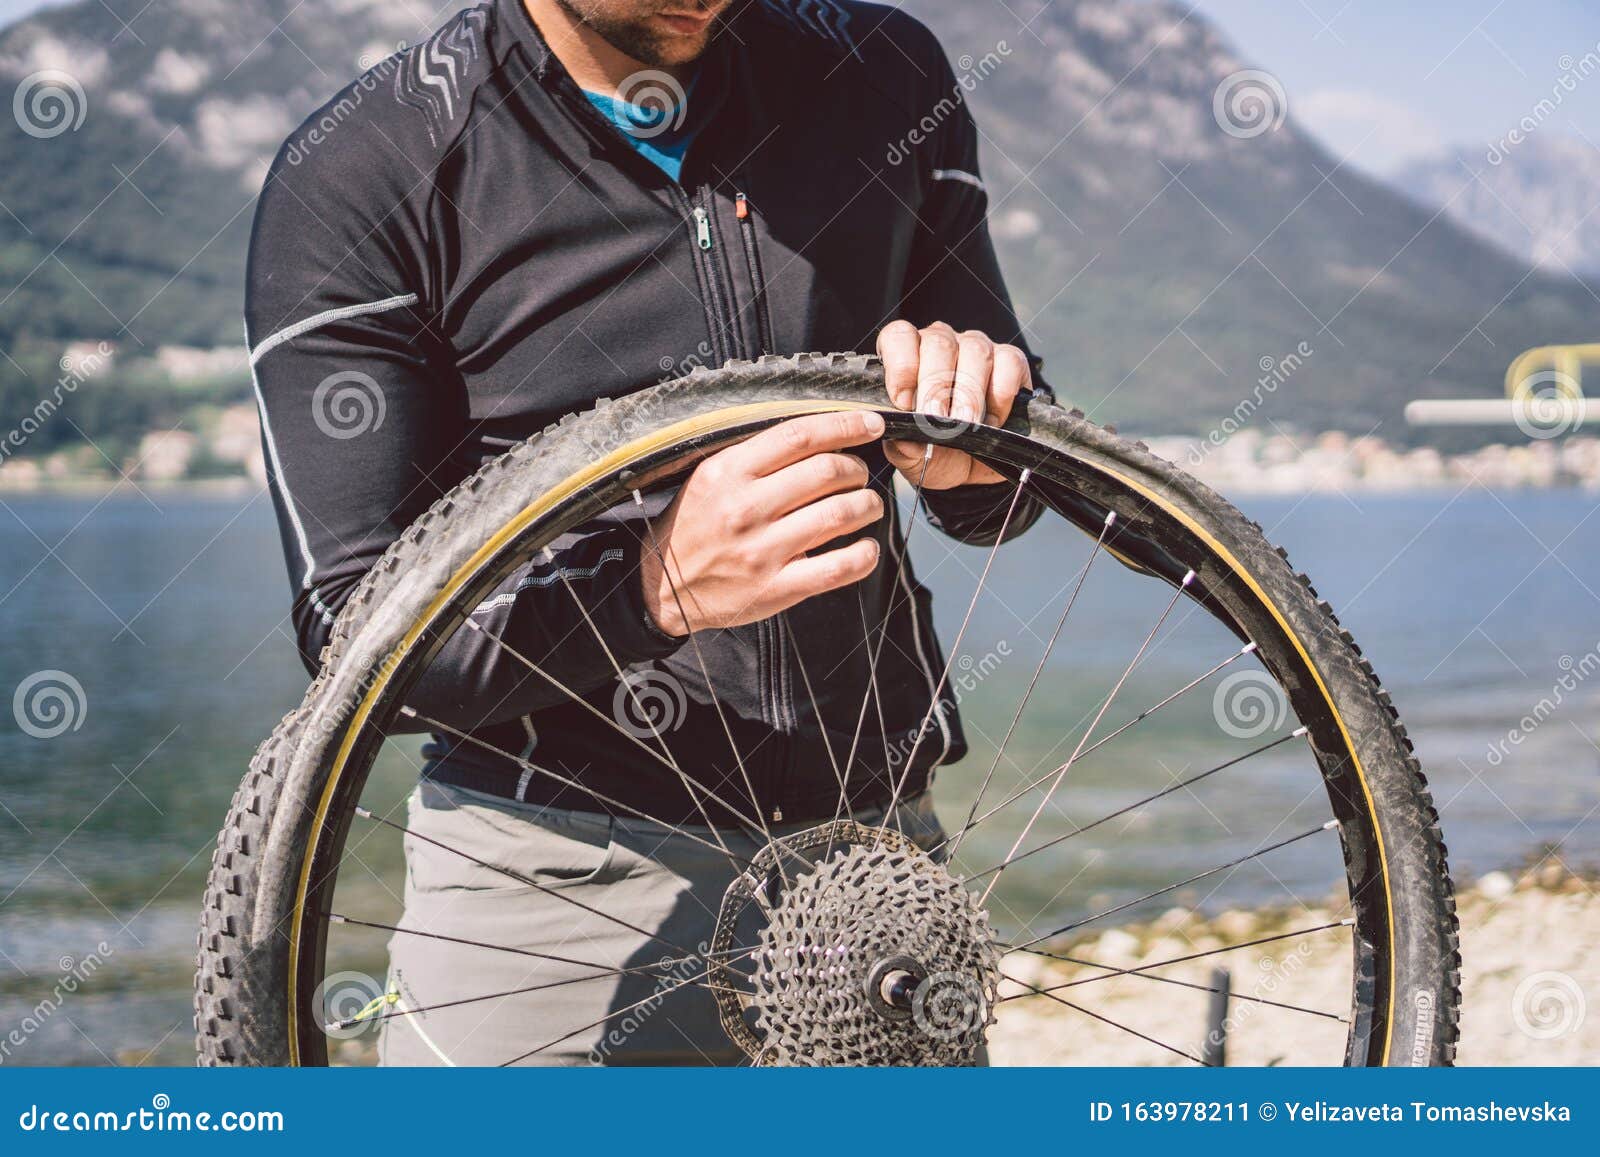 Bike Repair Man Repairing Mountain Bike Cyclist Man In Trouble Rear Wheel Wheel Case Of Accident Man Fixes Bike Near Stock Image Image Of Person Puncture